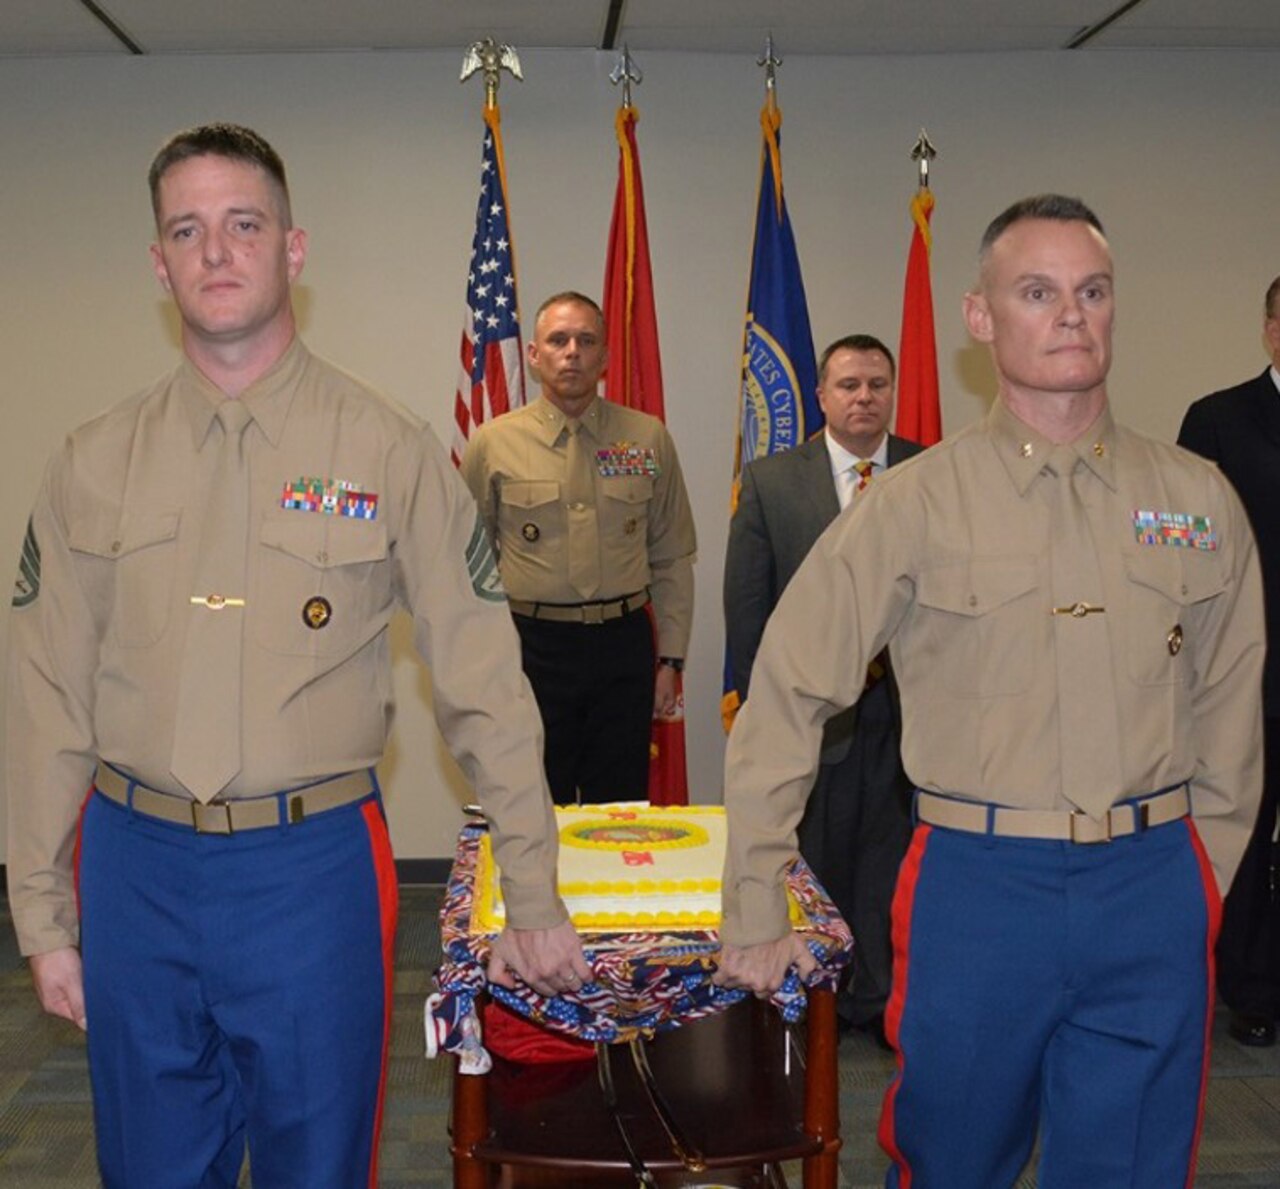 Men and women from the Marine element at U.S. Cyber Command headquarters joined Marine Brig. Gen. Matthew Glavy and Marine Col. Andrew Moyer to celebrate the 240th birthday of the U.S. Marine Corps at U.S. Cyber Command headquarters on Fort Meade, Md., Nov. 10, 2015. The cake is representative of the knowledge and experience shared between Marine Corps members, -- past present and future. Courtesy photo